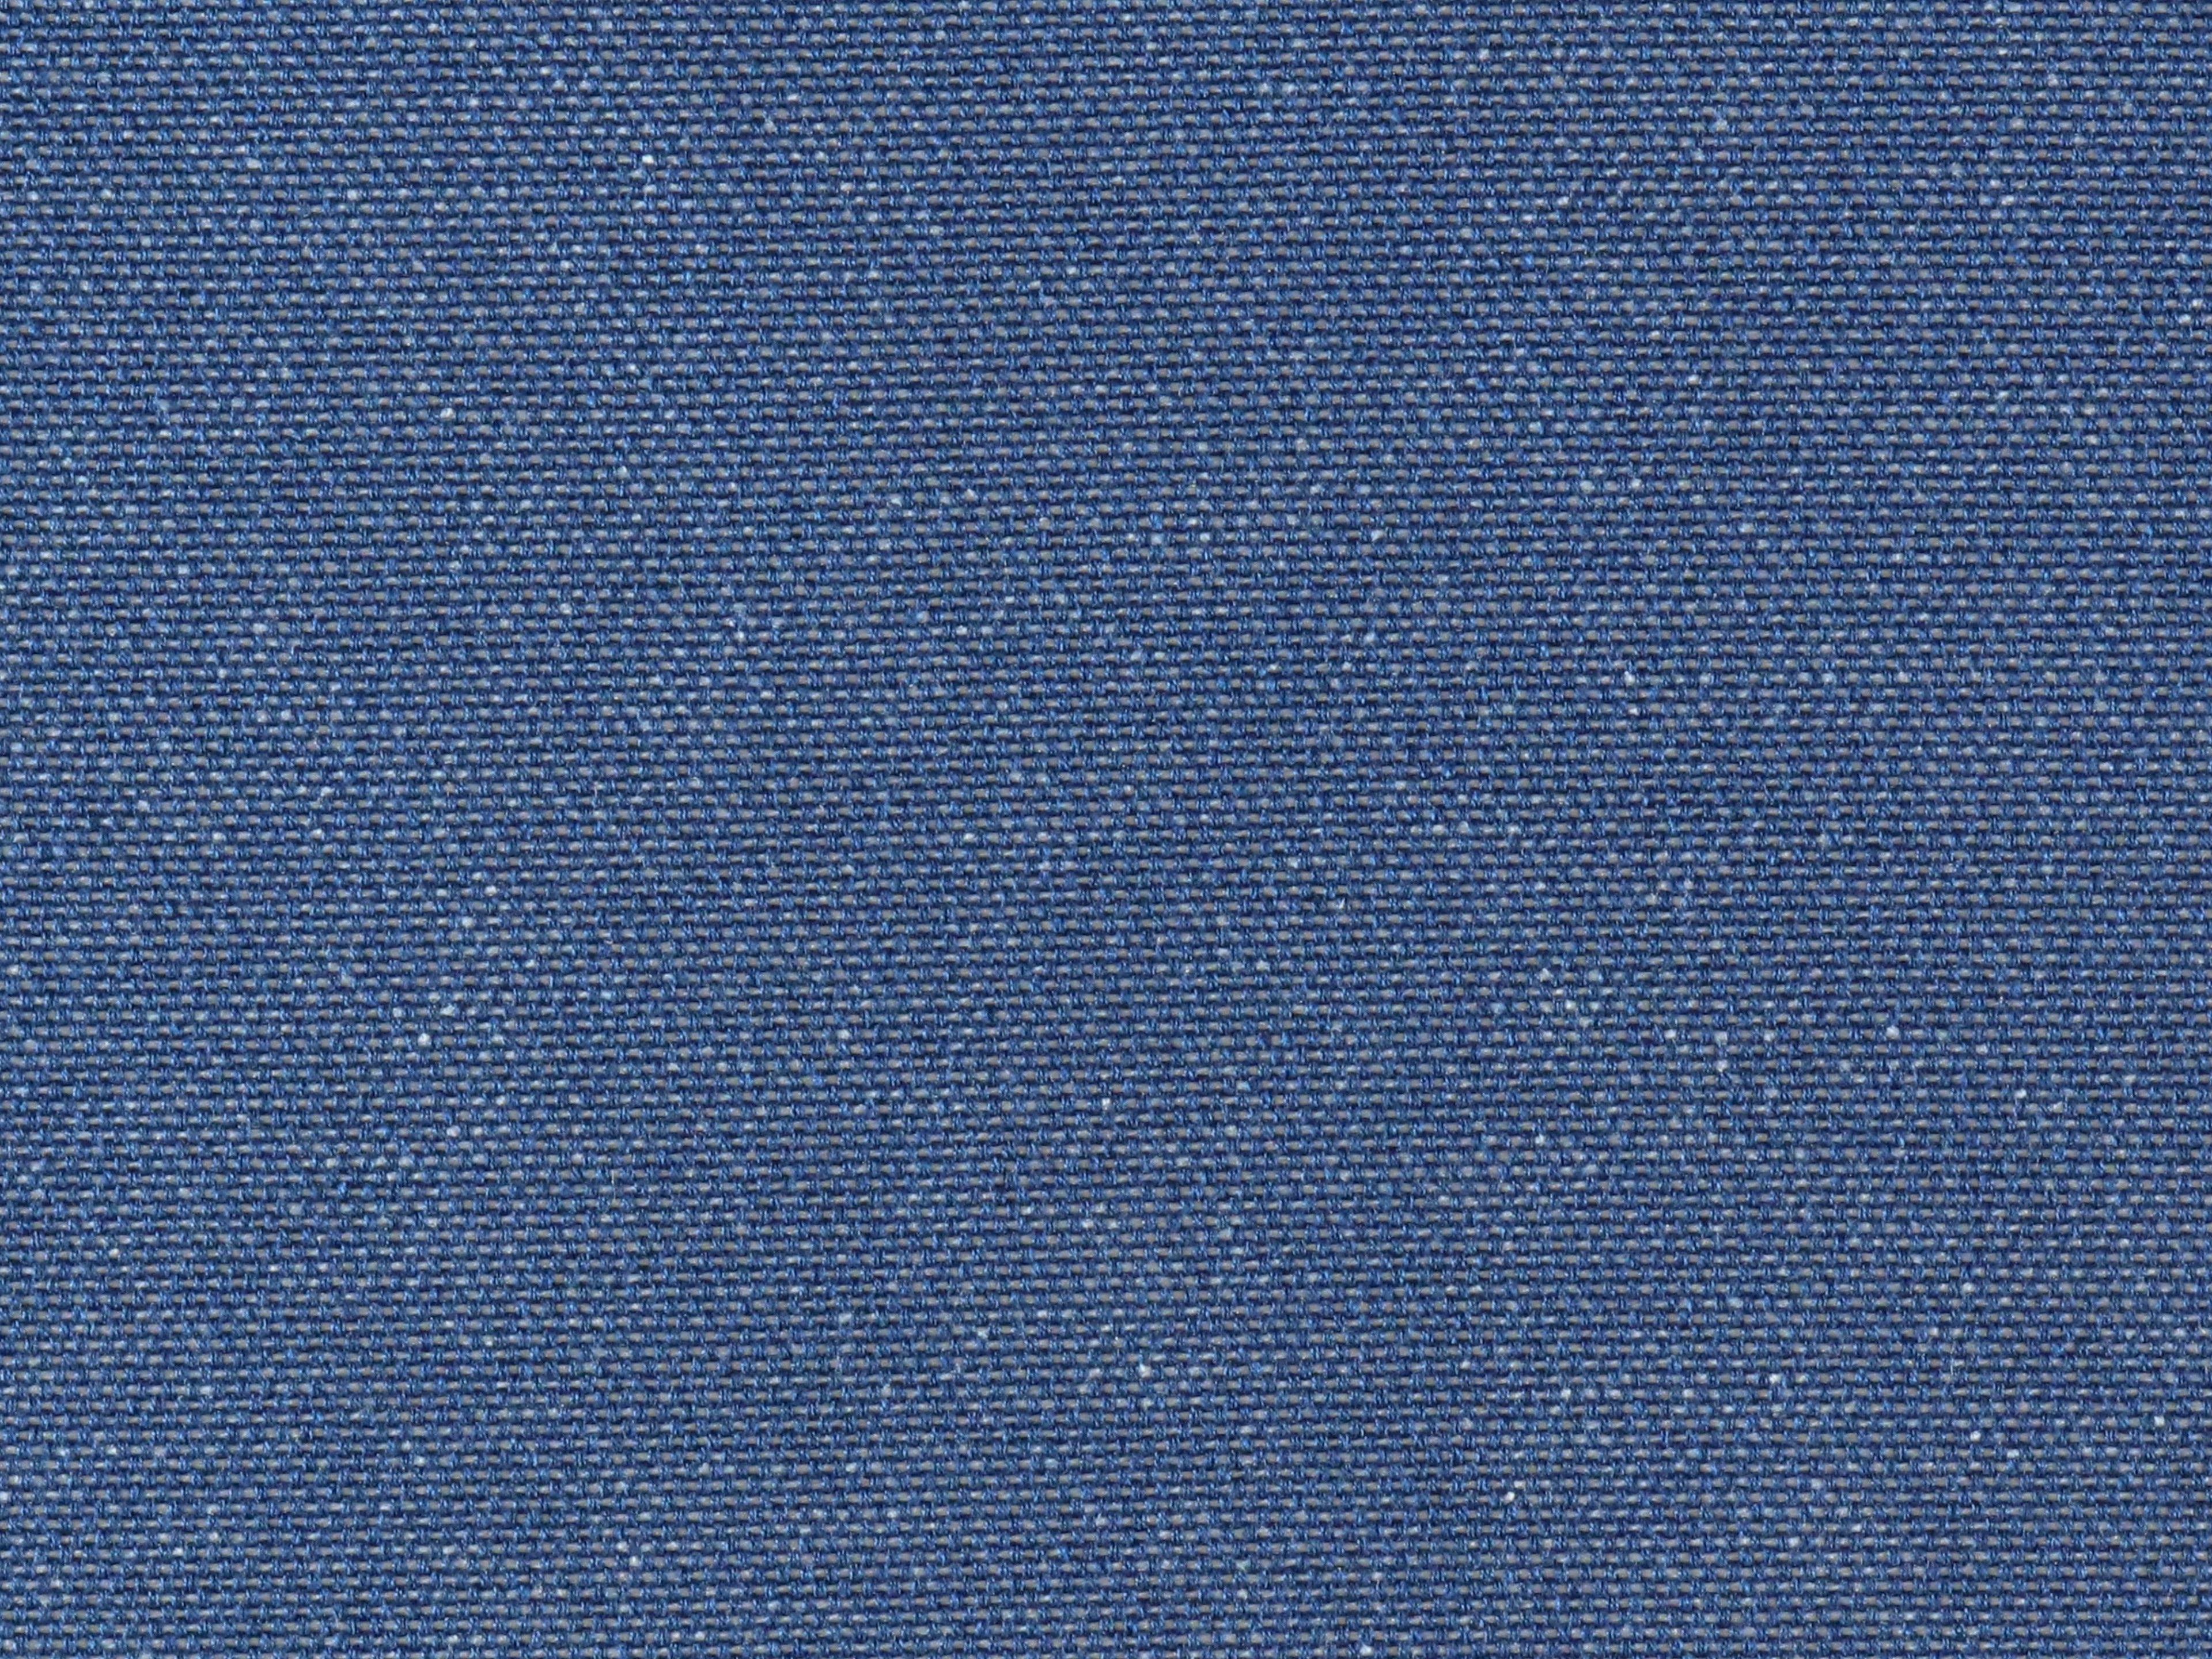 Valverde fabric in marine color - pattern number L6 0009VALV - by Scalamandre in the Old World Weavers collection